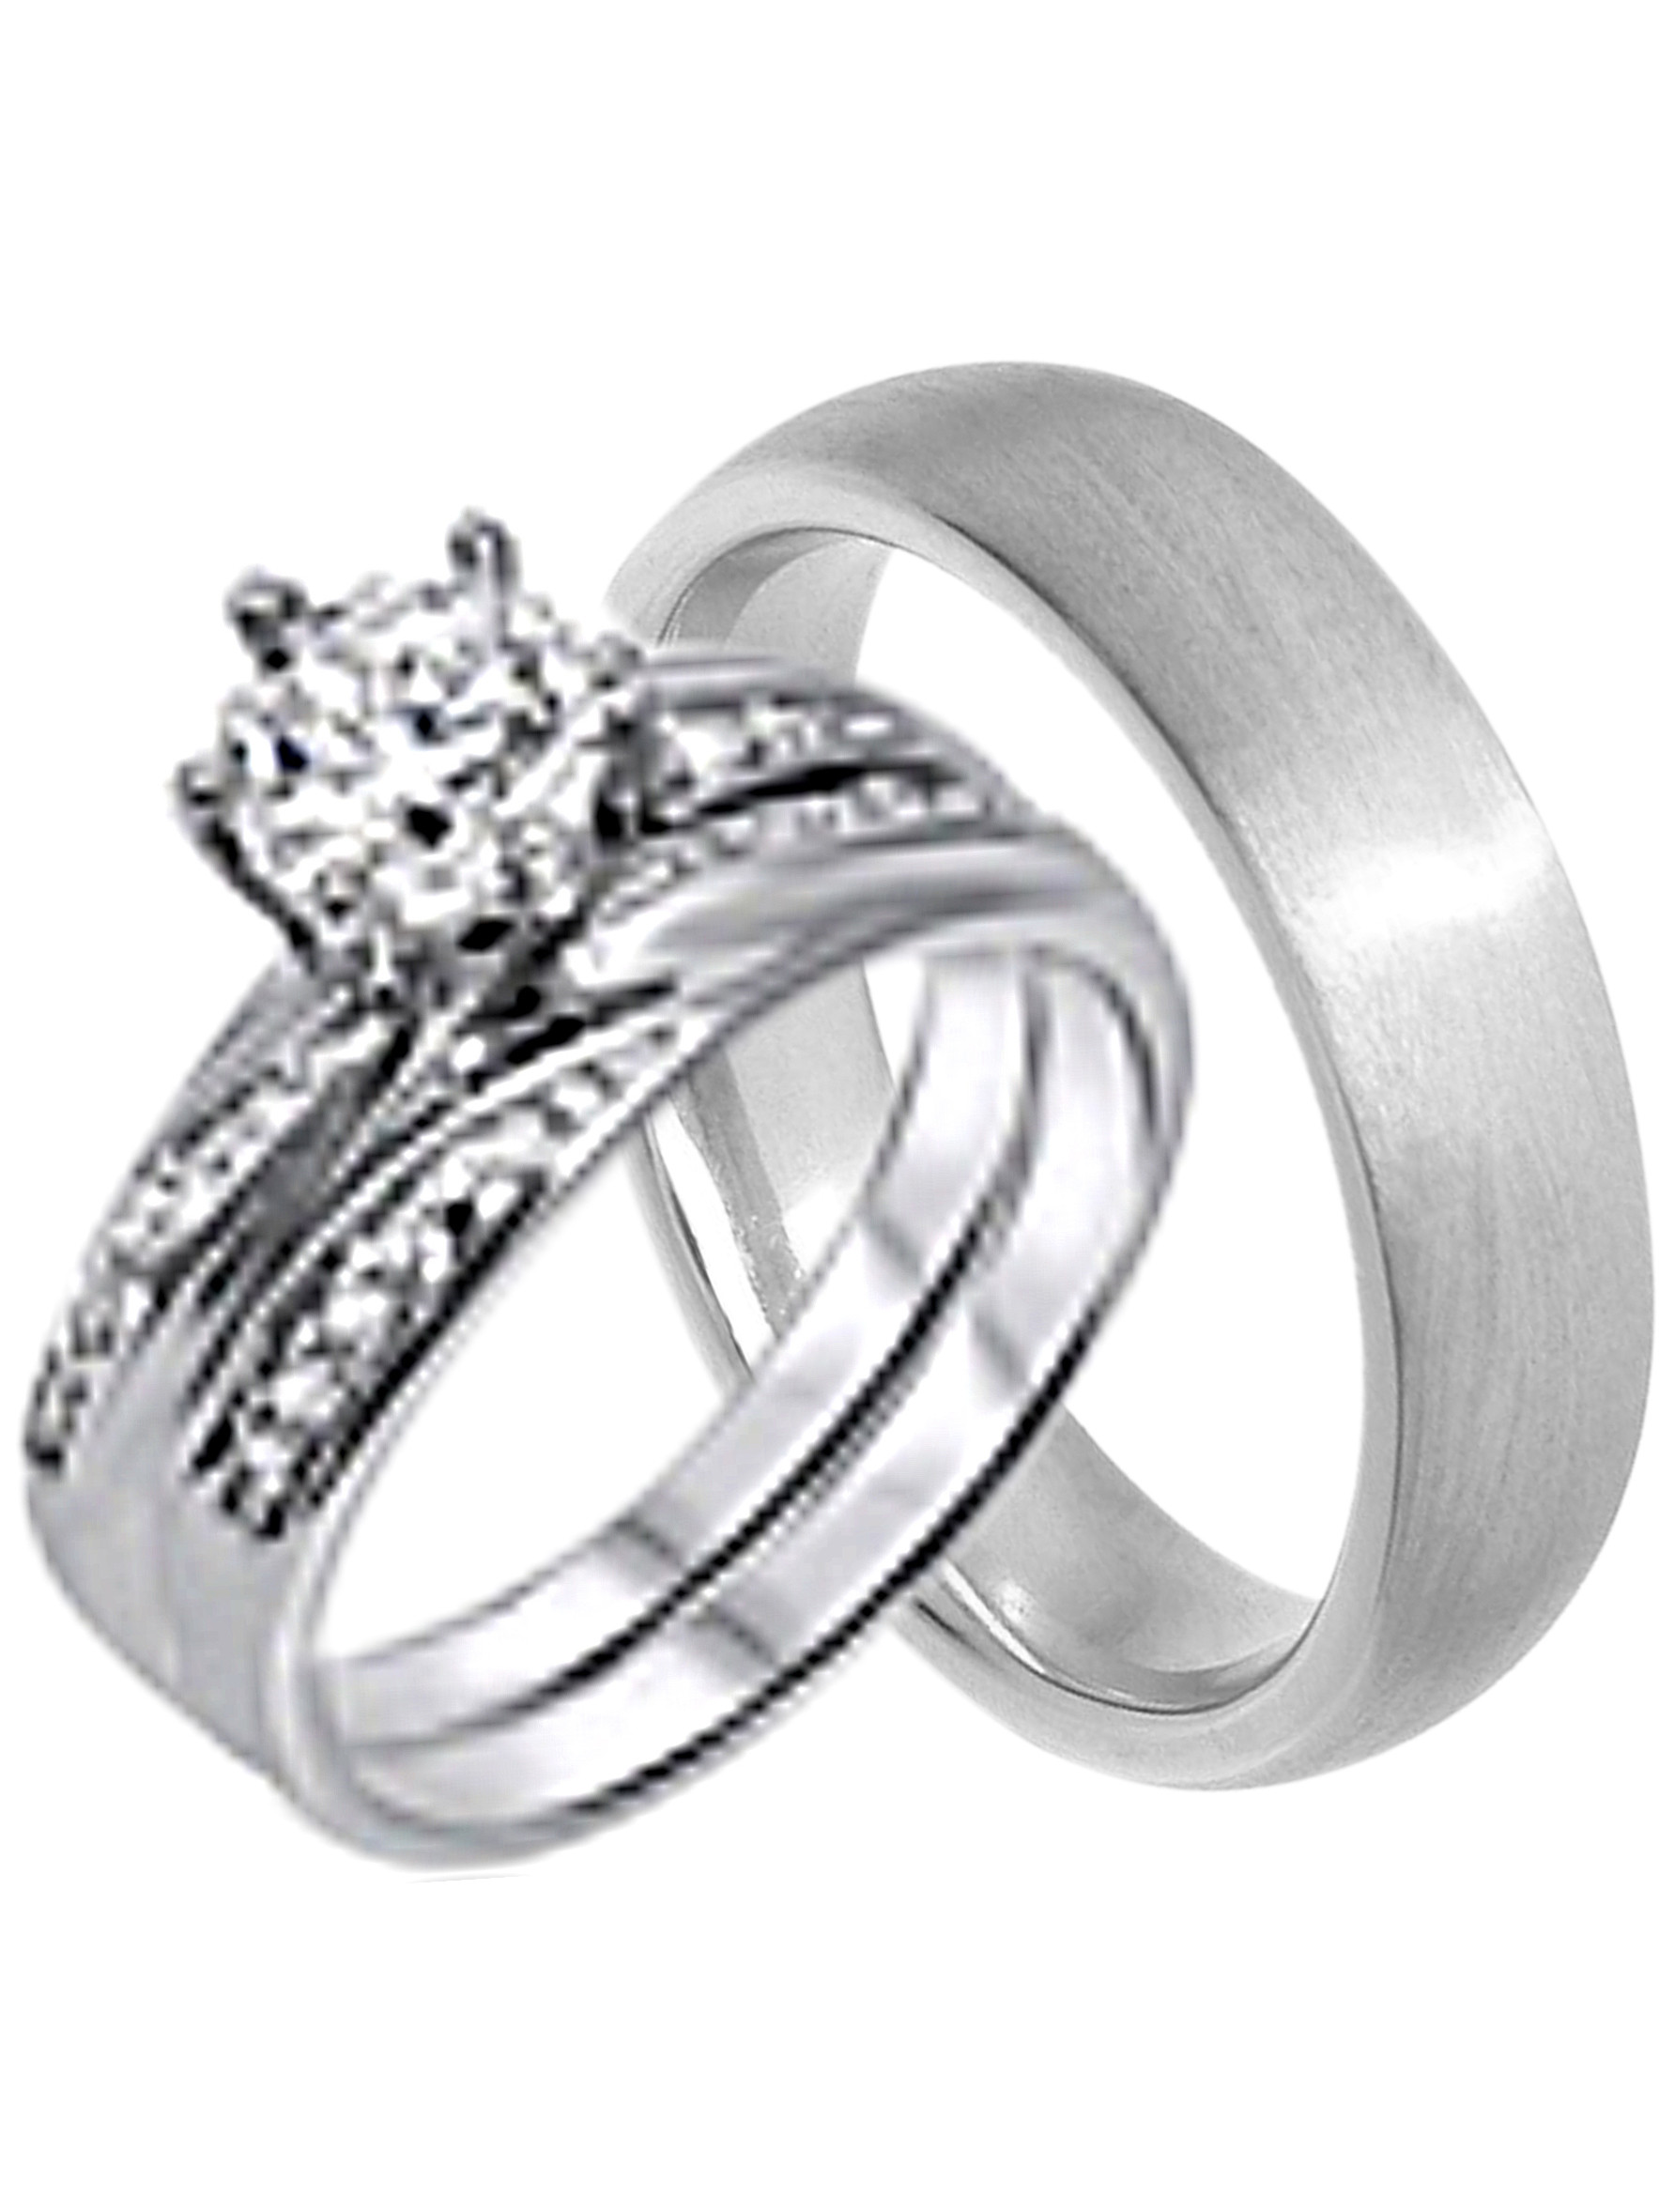 Cheap Wedding Band Sets His And Hers
 His and Hers Wedding Ring Set Cheap Wedding Bands for Him